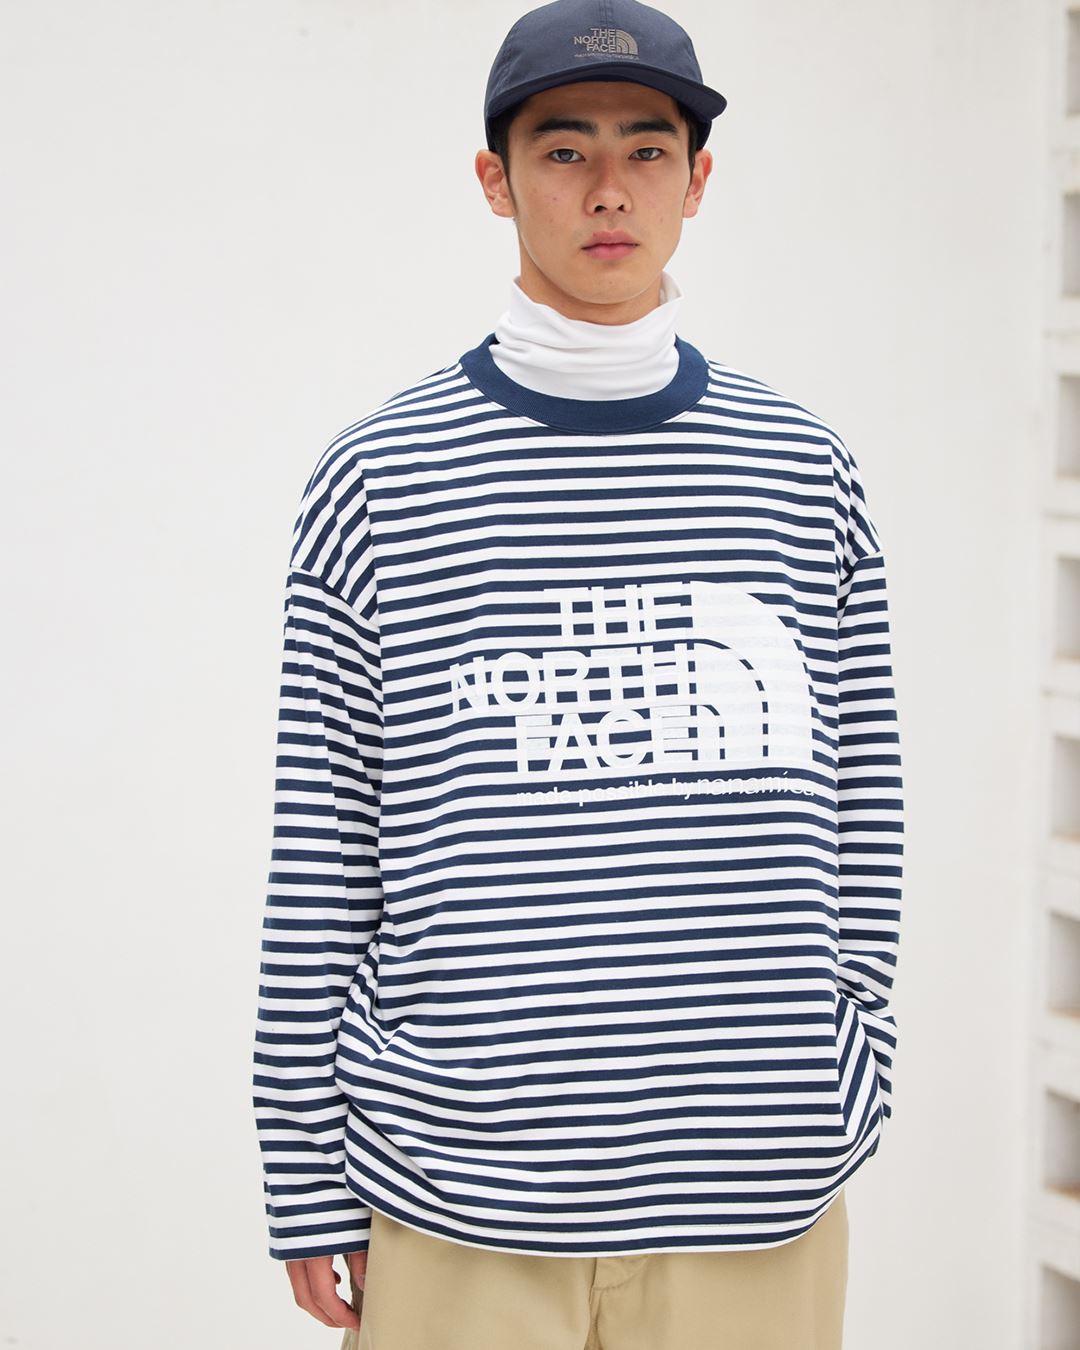 nanamica / Nanamica launches a capsule collection in collaboration with